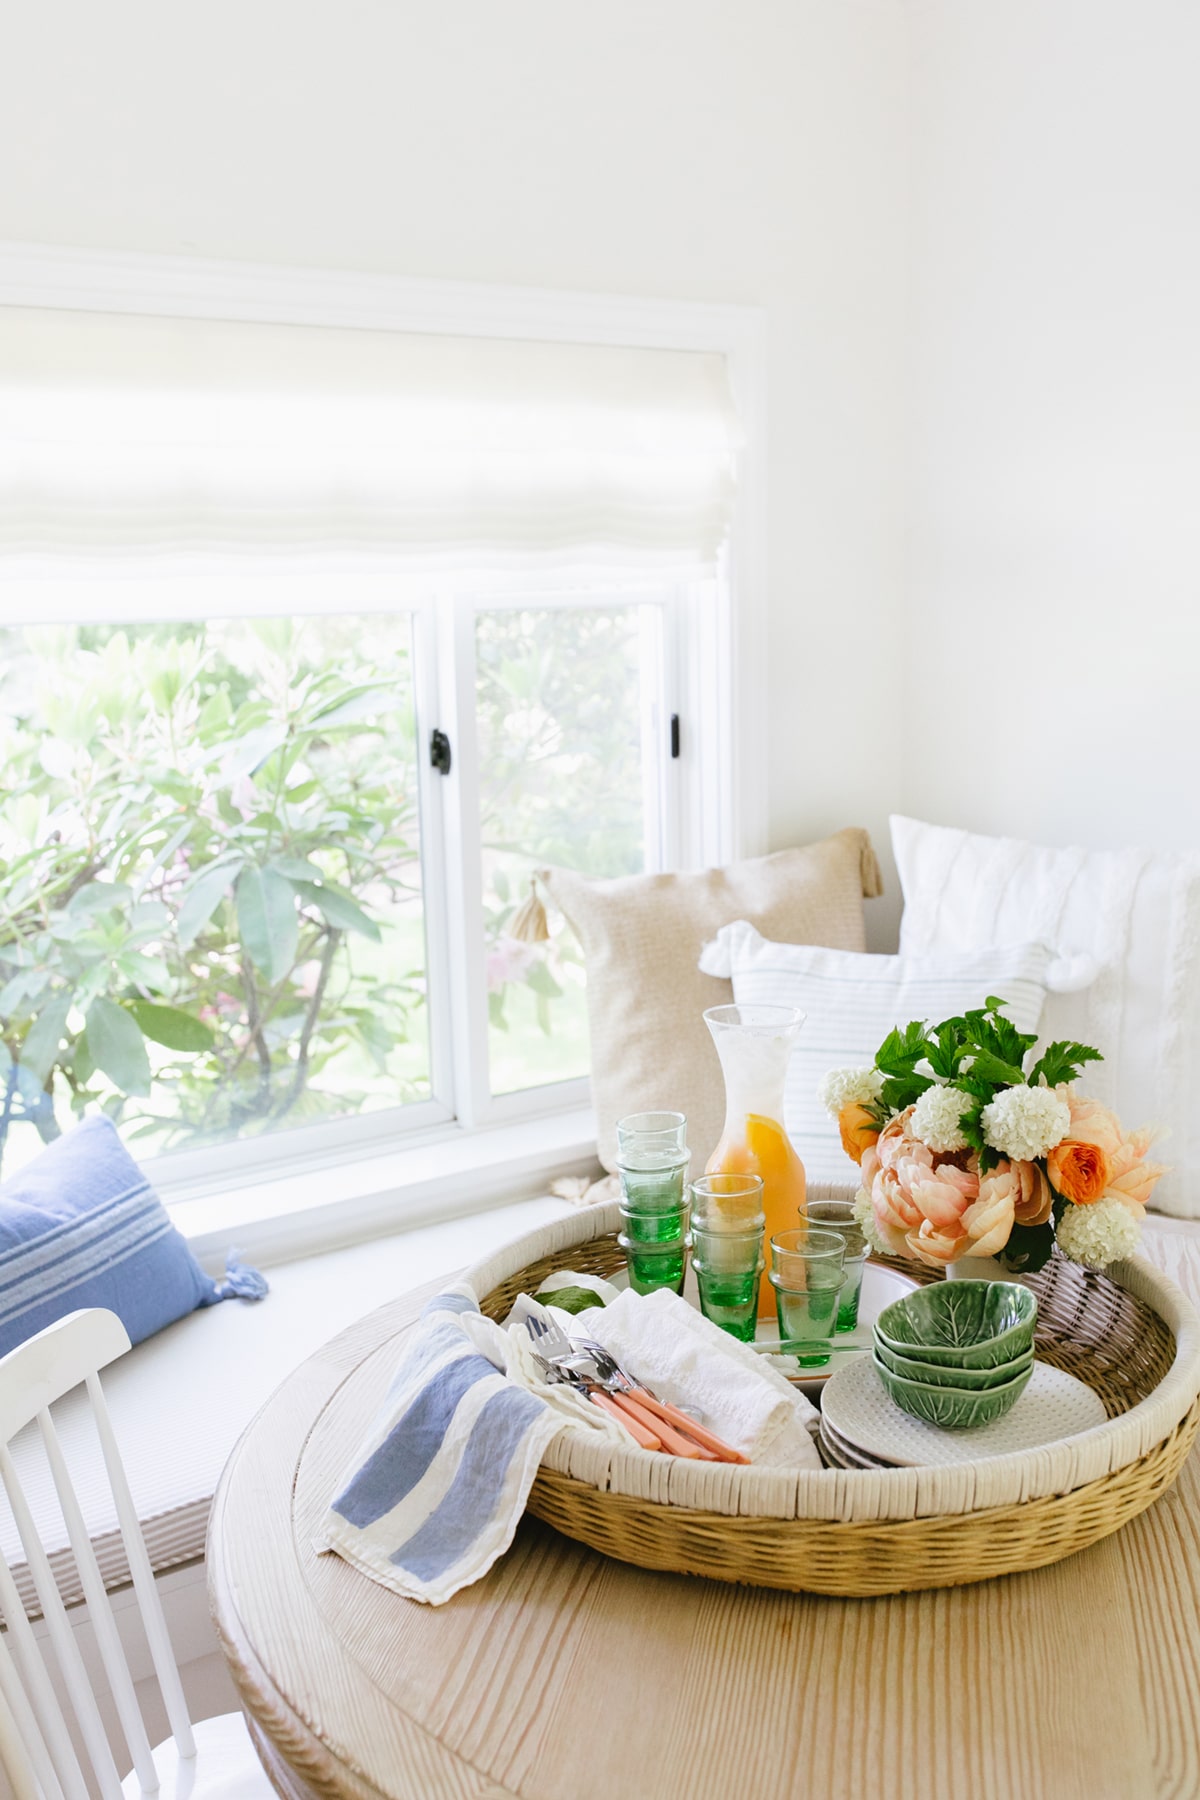 quick summer decor updates for our breakfast nook from serena and lily on coco kelley